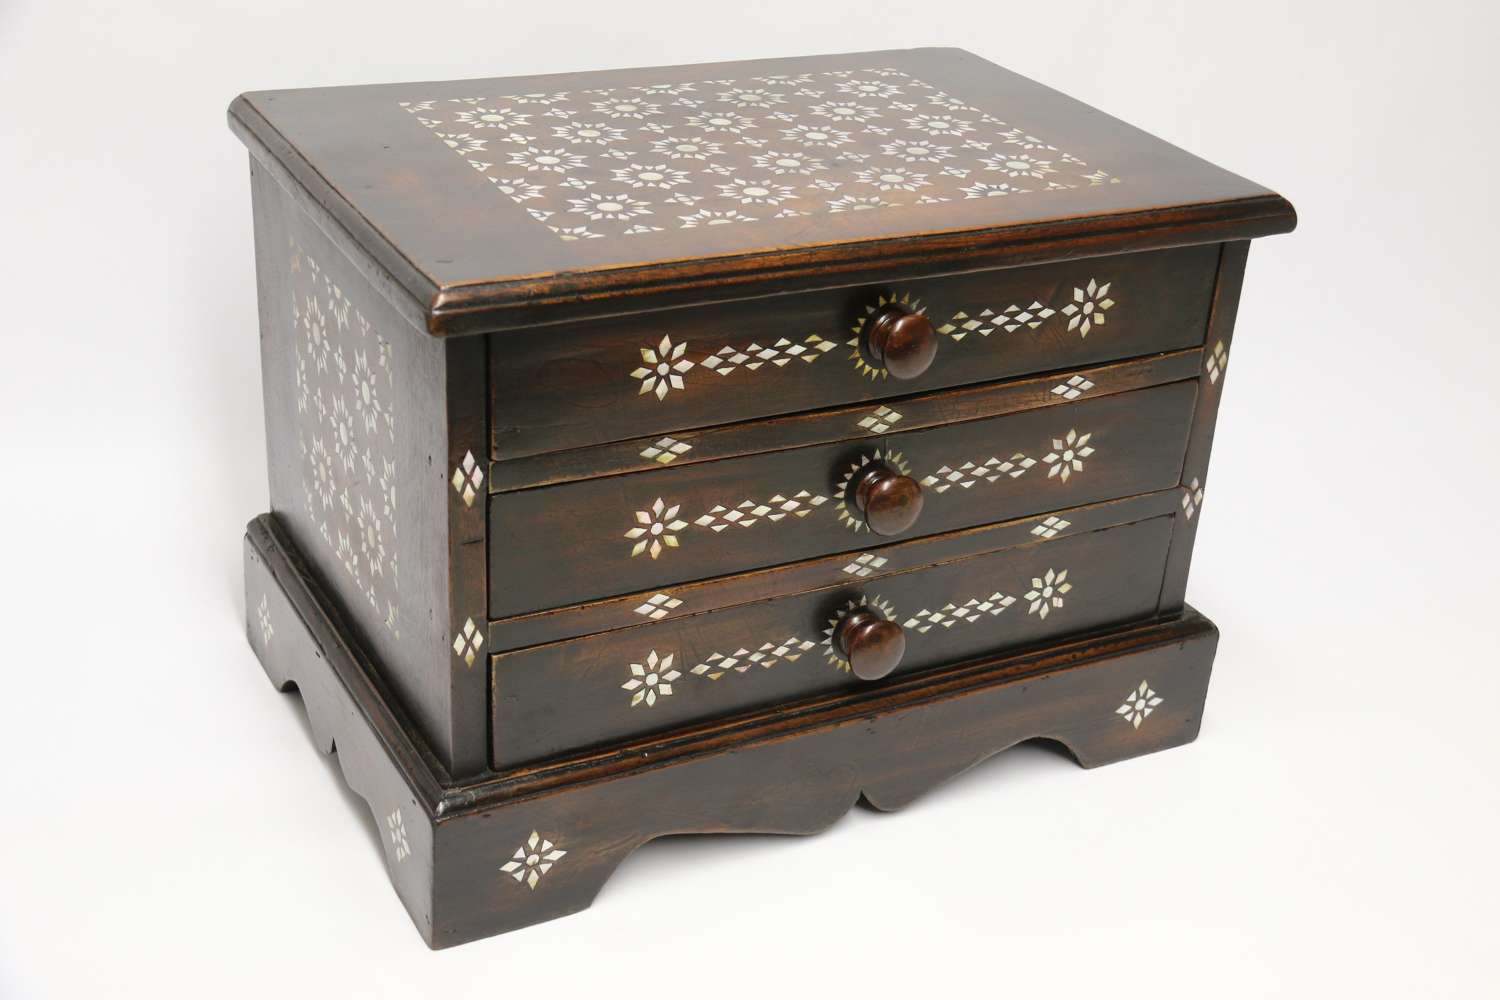 Early 20th century inlaid hardwood Anglo Indian collectors chest